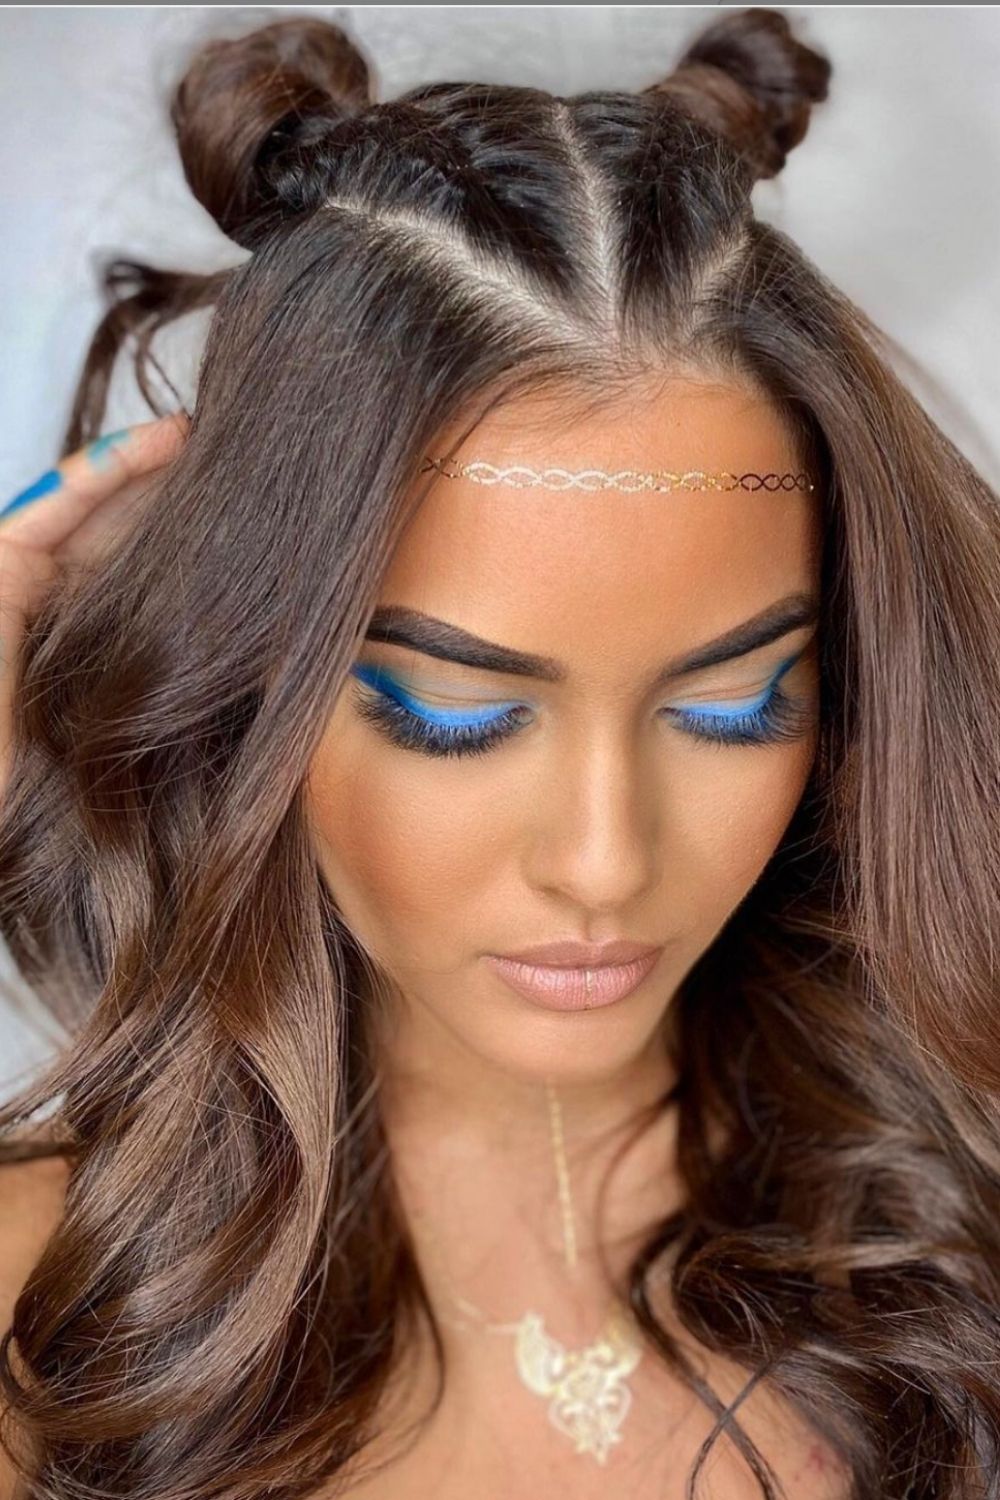 38 Best Festival Coachella Makeup Looks To Be The Real Hit